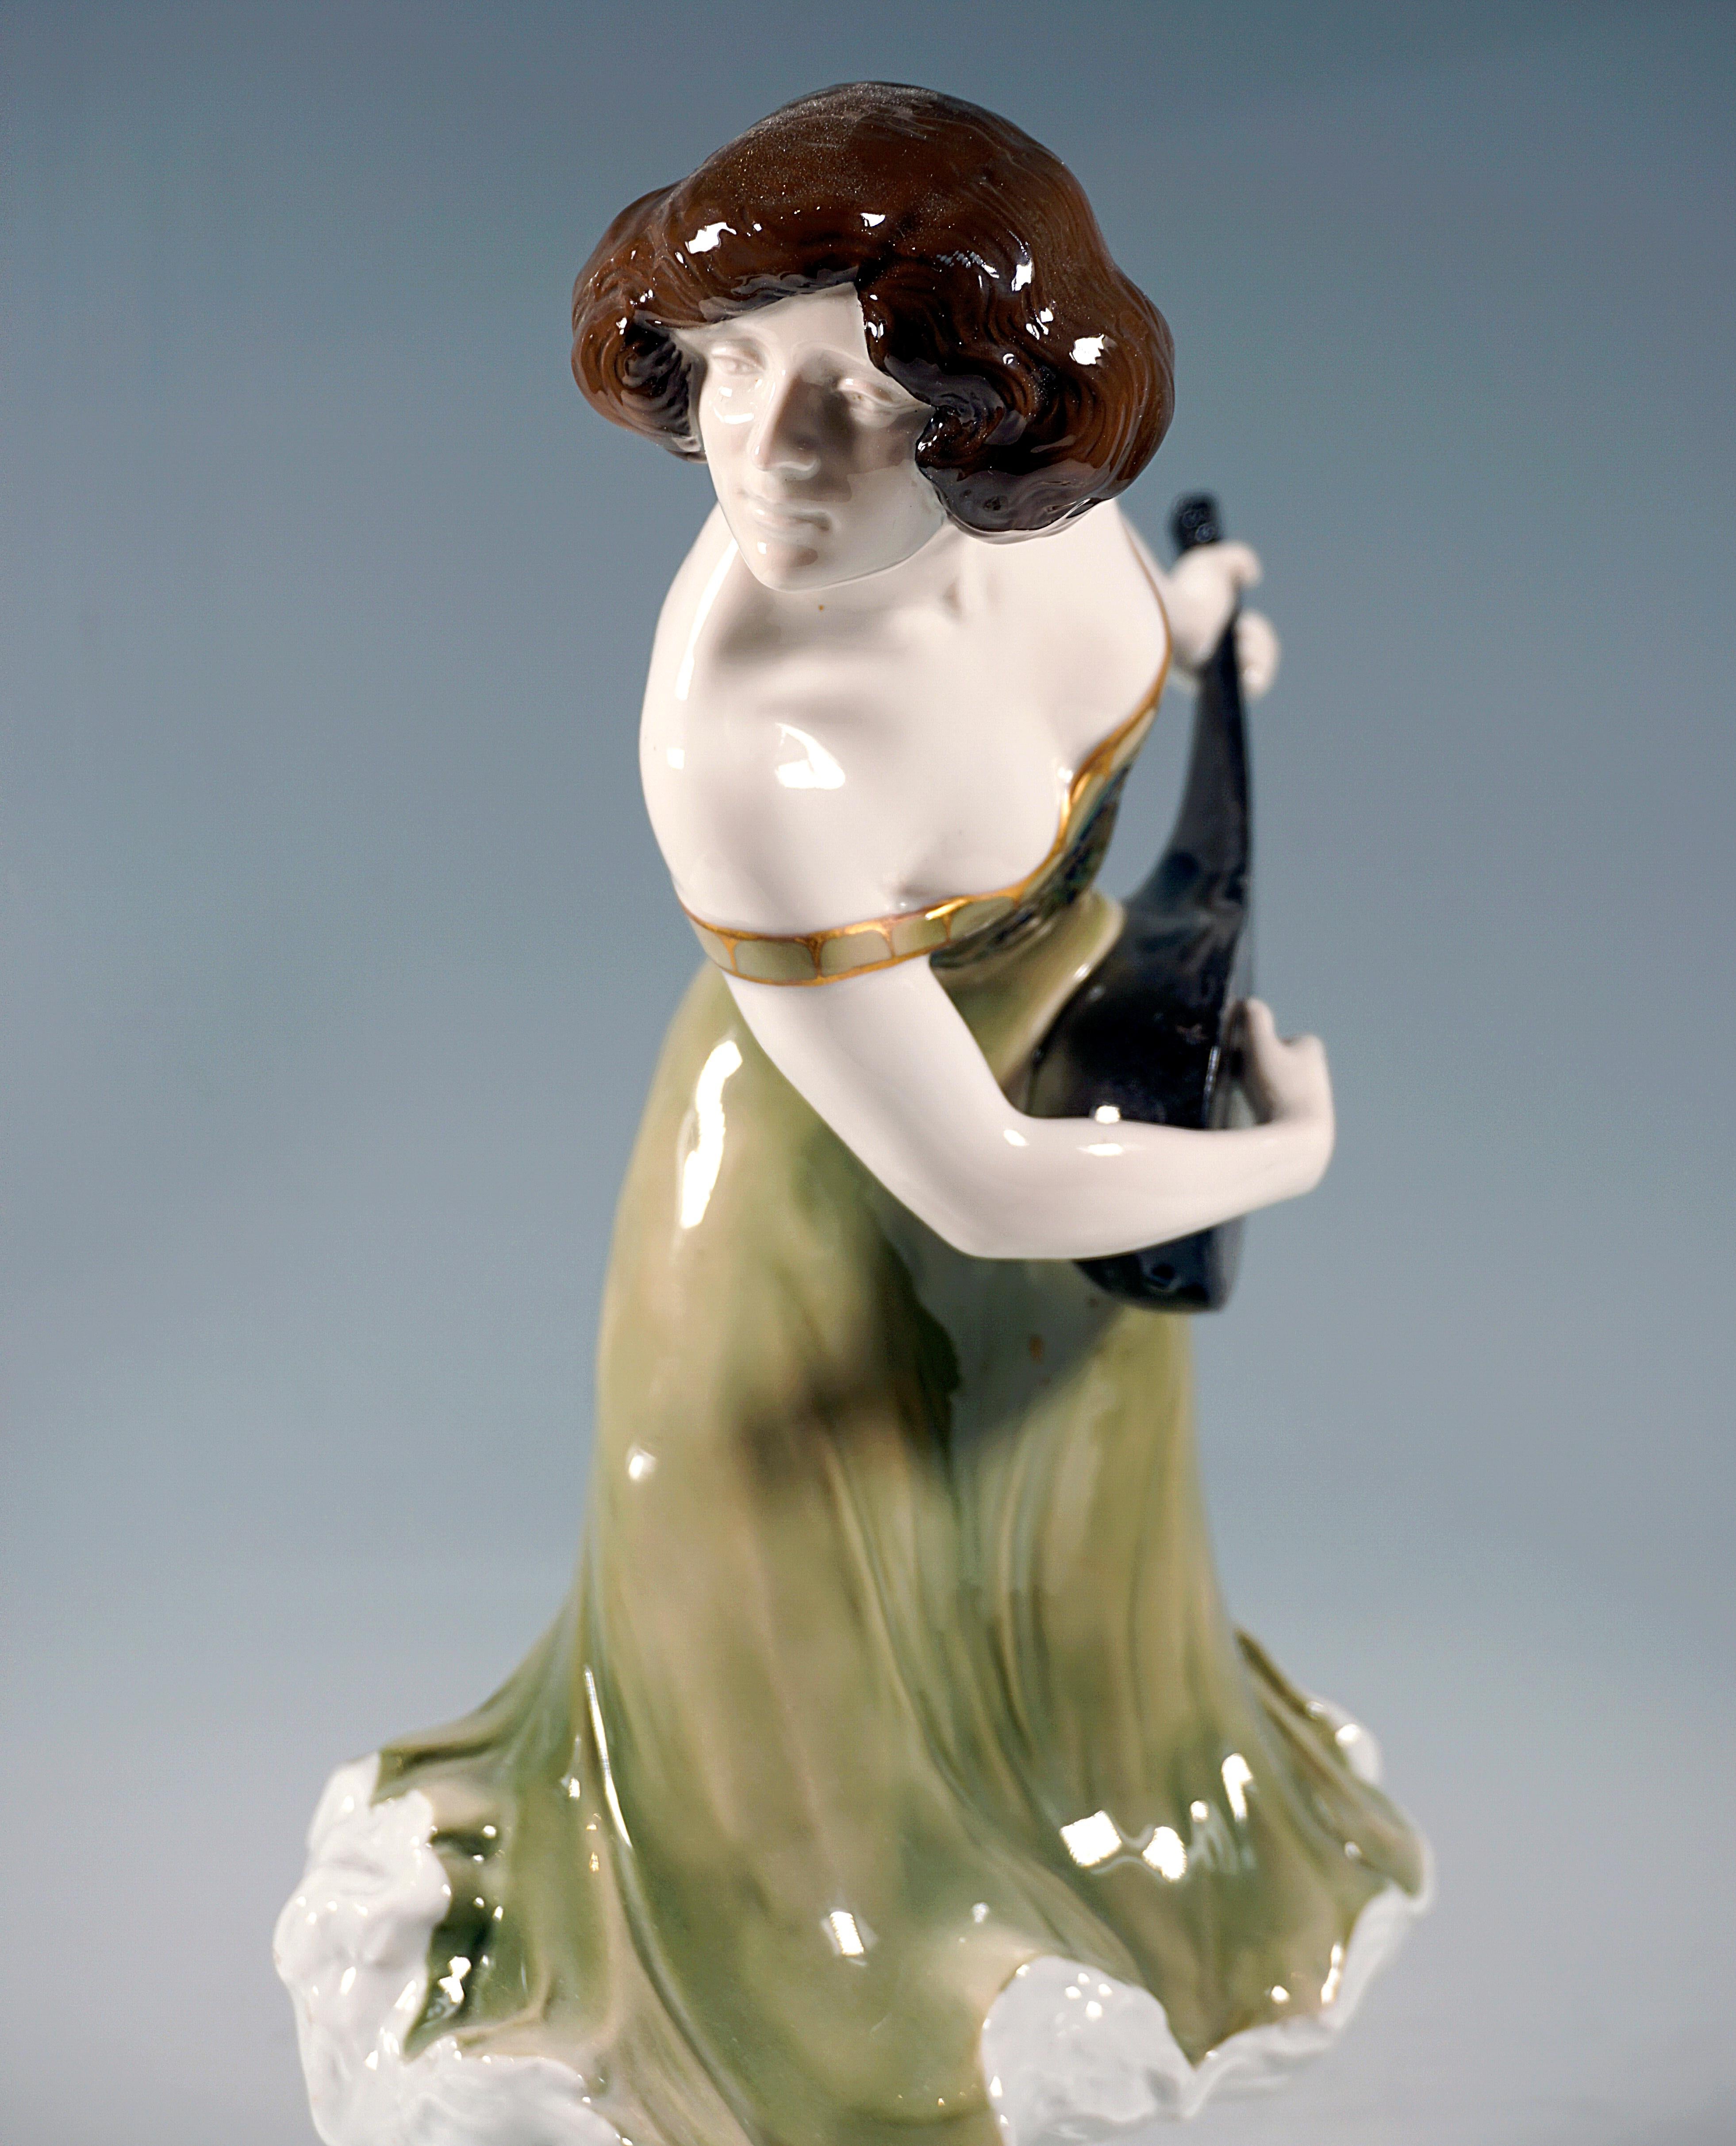 Hand-Crafted Large Porcelain Figurine 'Cabaret', by R. Marcuse, Rosenthal Selb Germany, 1920 For Sale